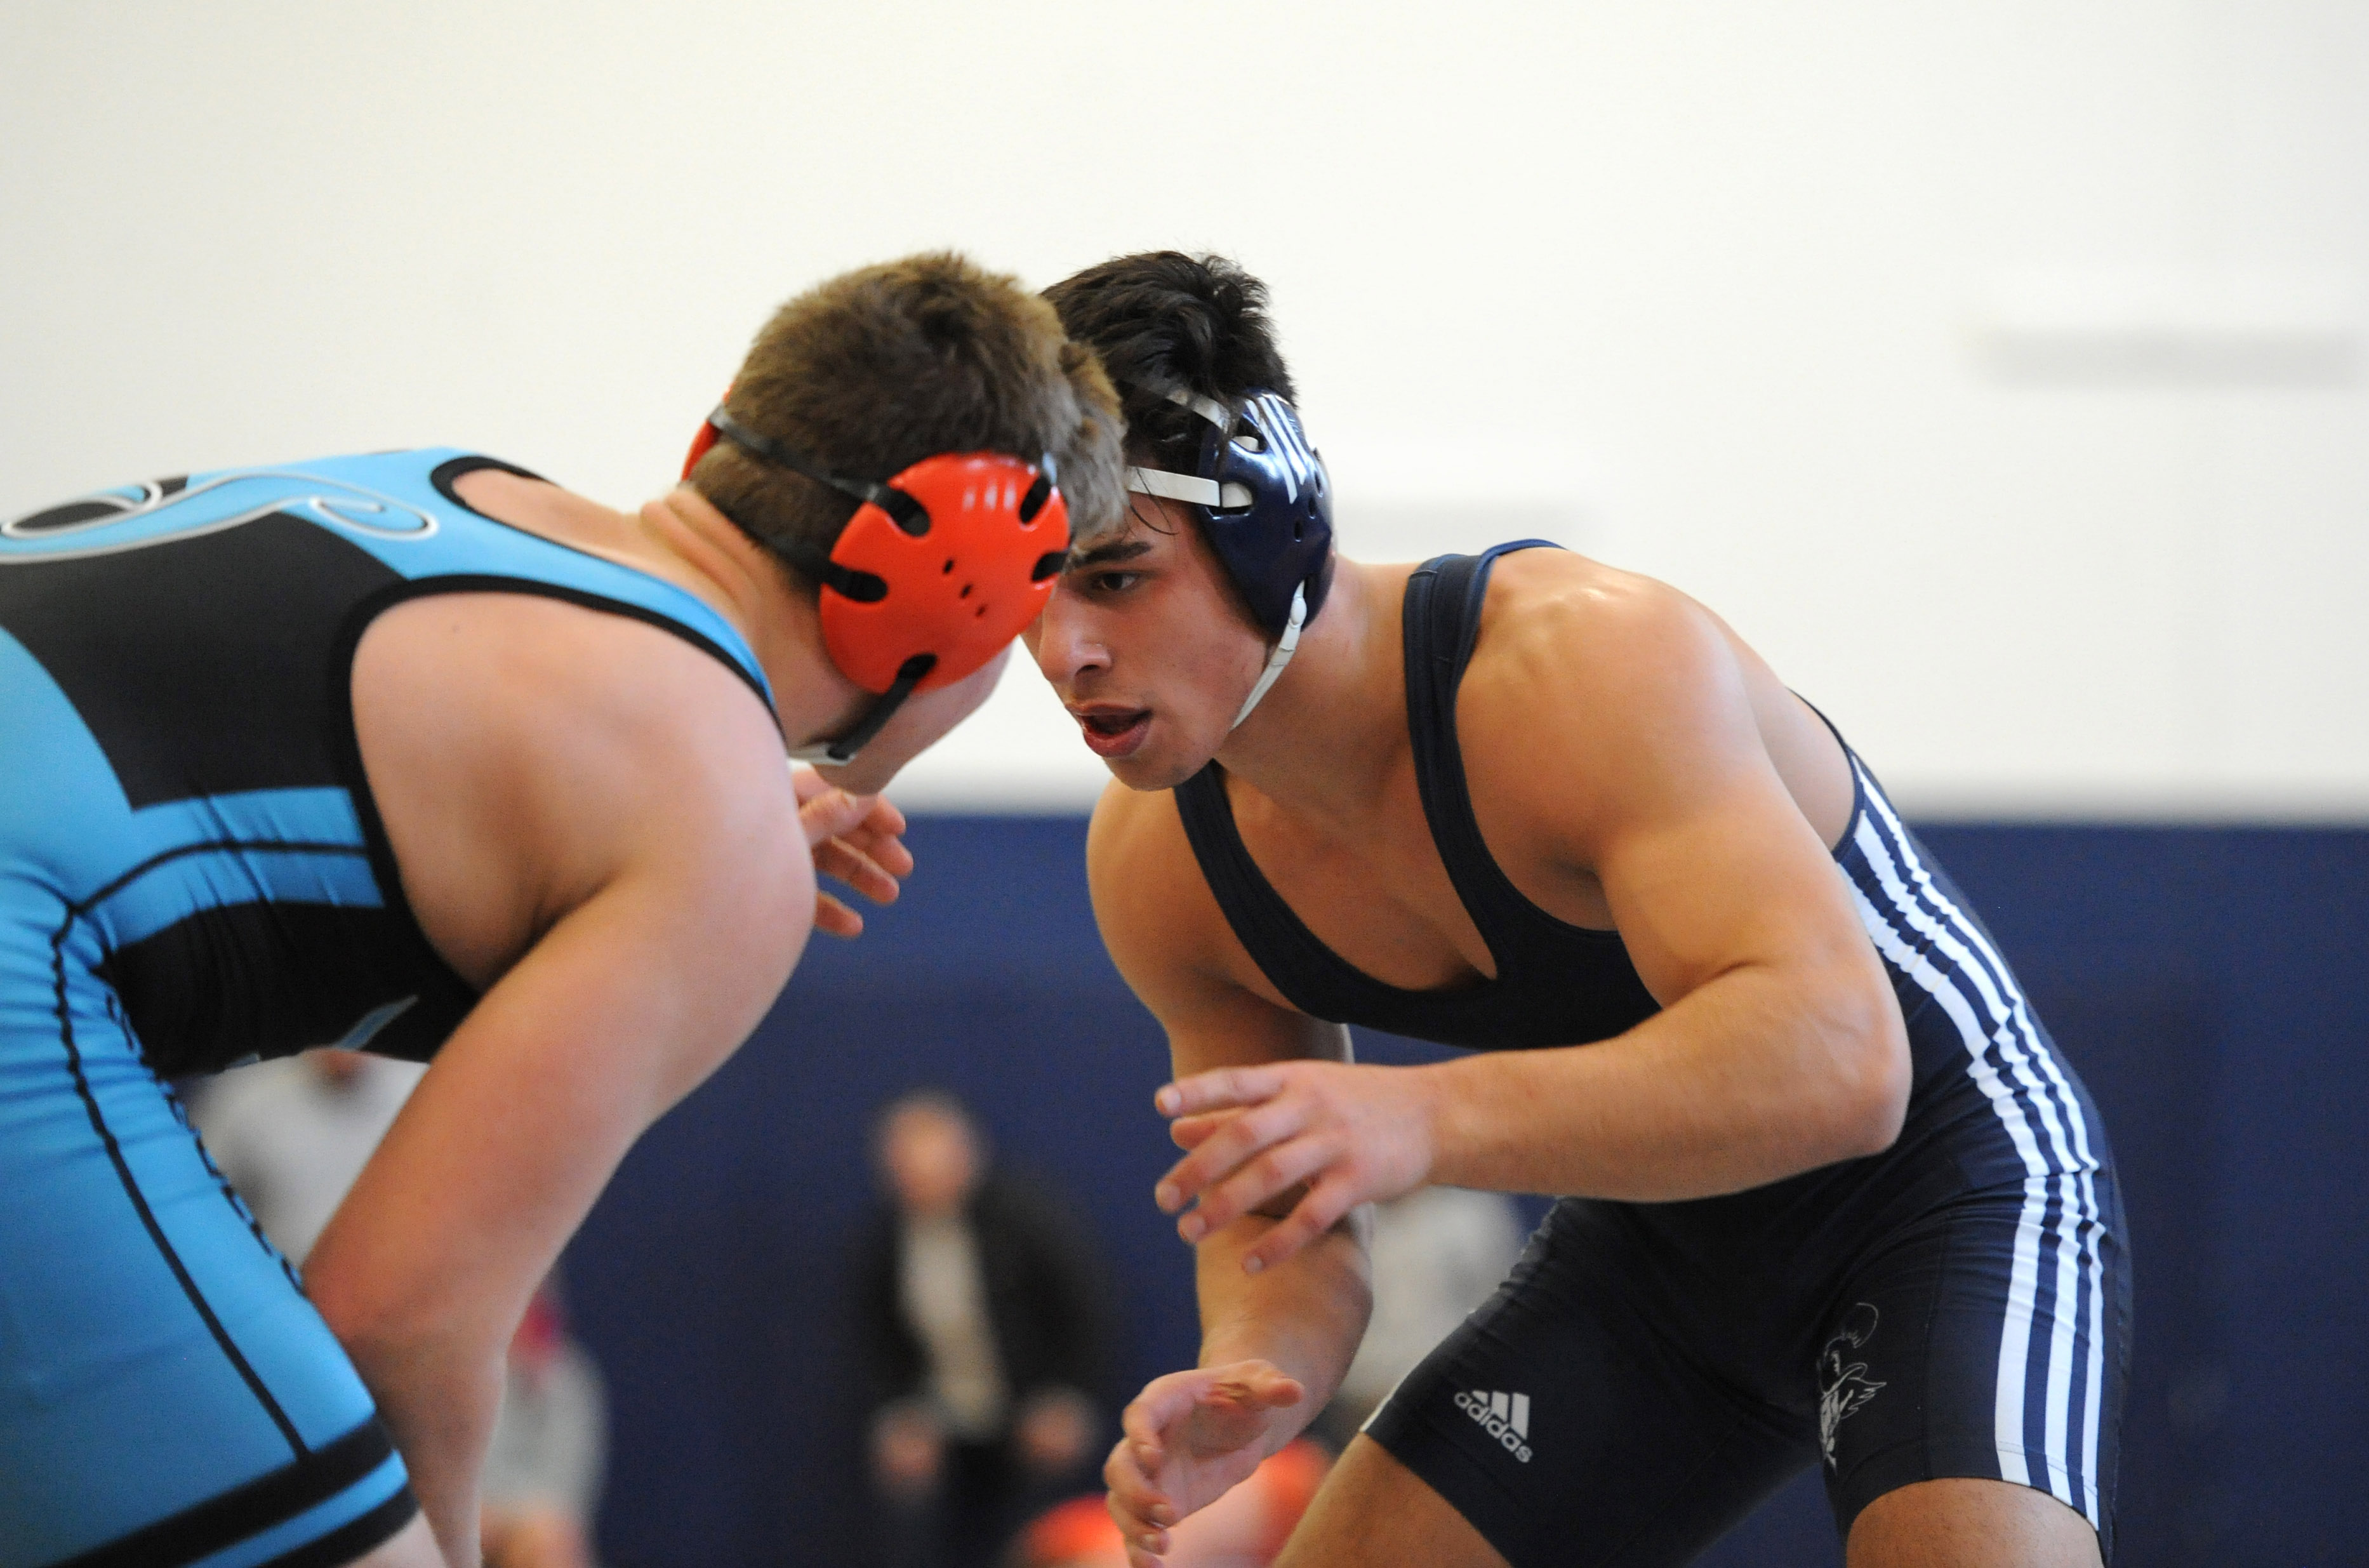 2018 Wrestling Reception and Match - Blair Academy